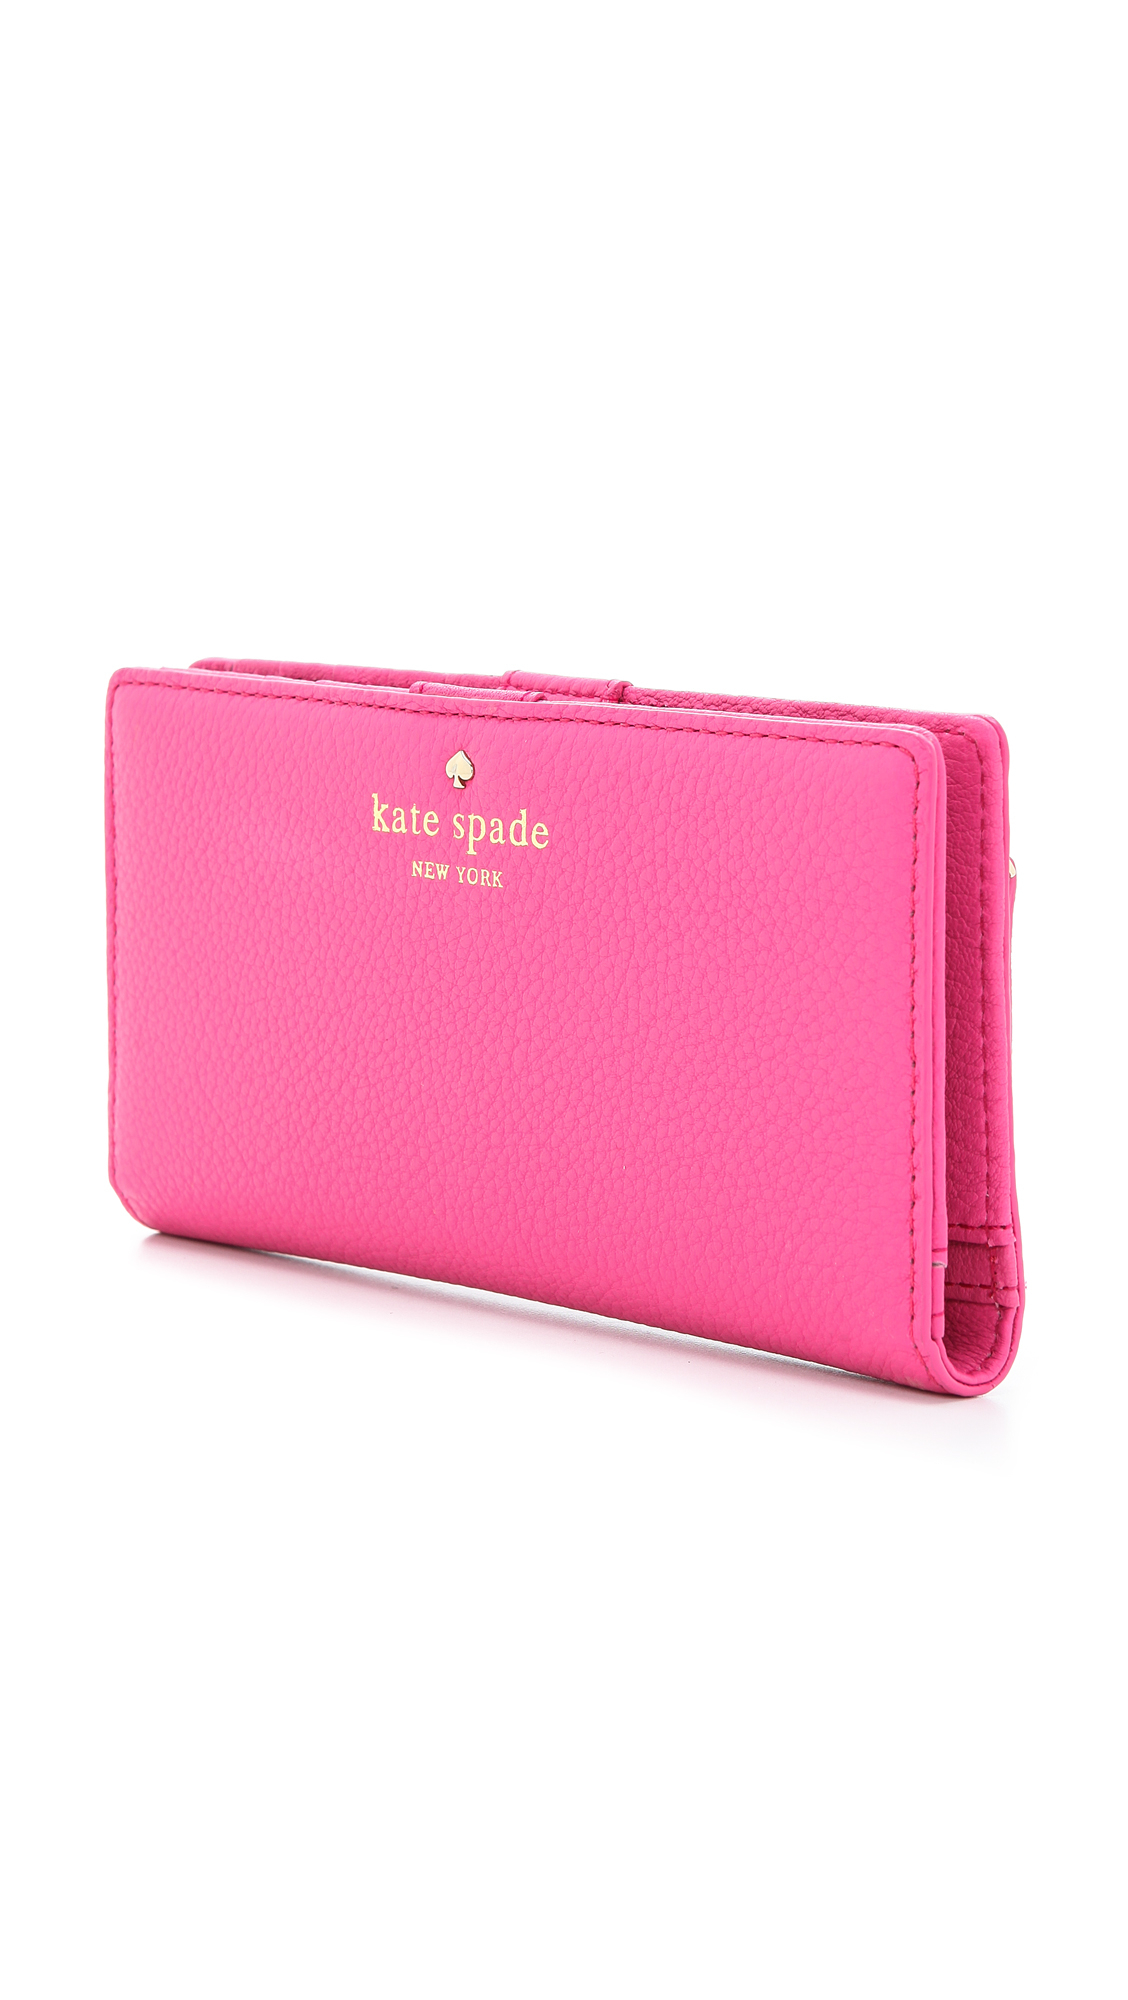 Kate Spade Cobble Hill Stacy Wallet - Black in Pink - Lyst